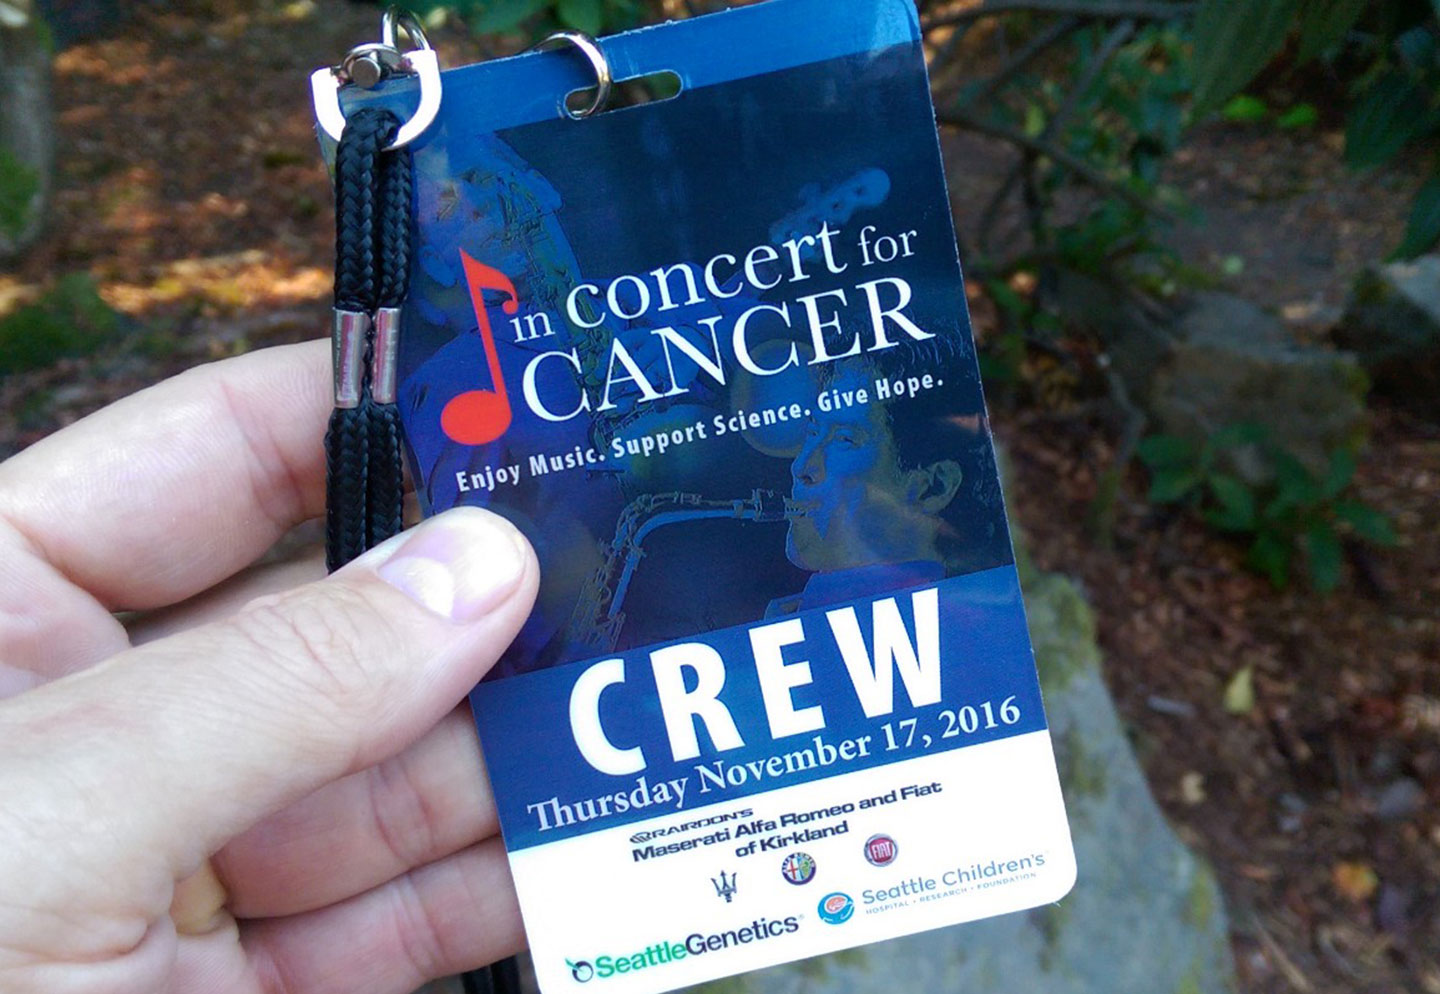 Concert promotion and marketing materials for In Concert for Cancer